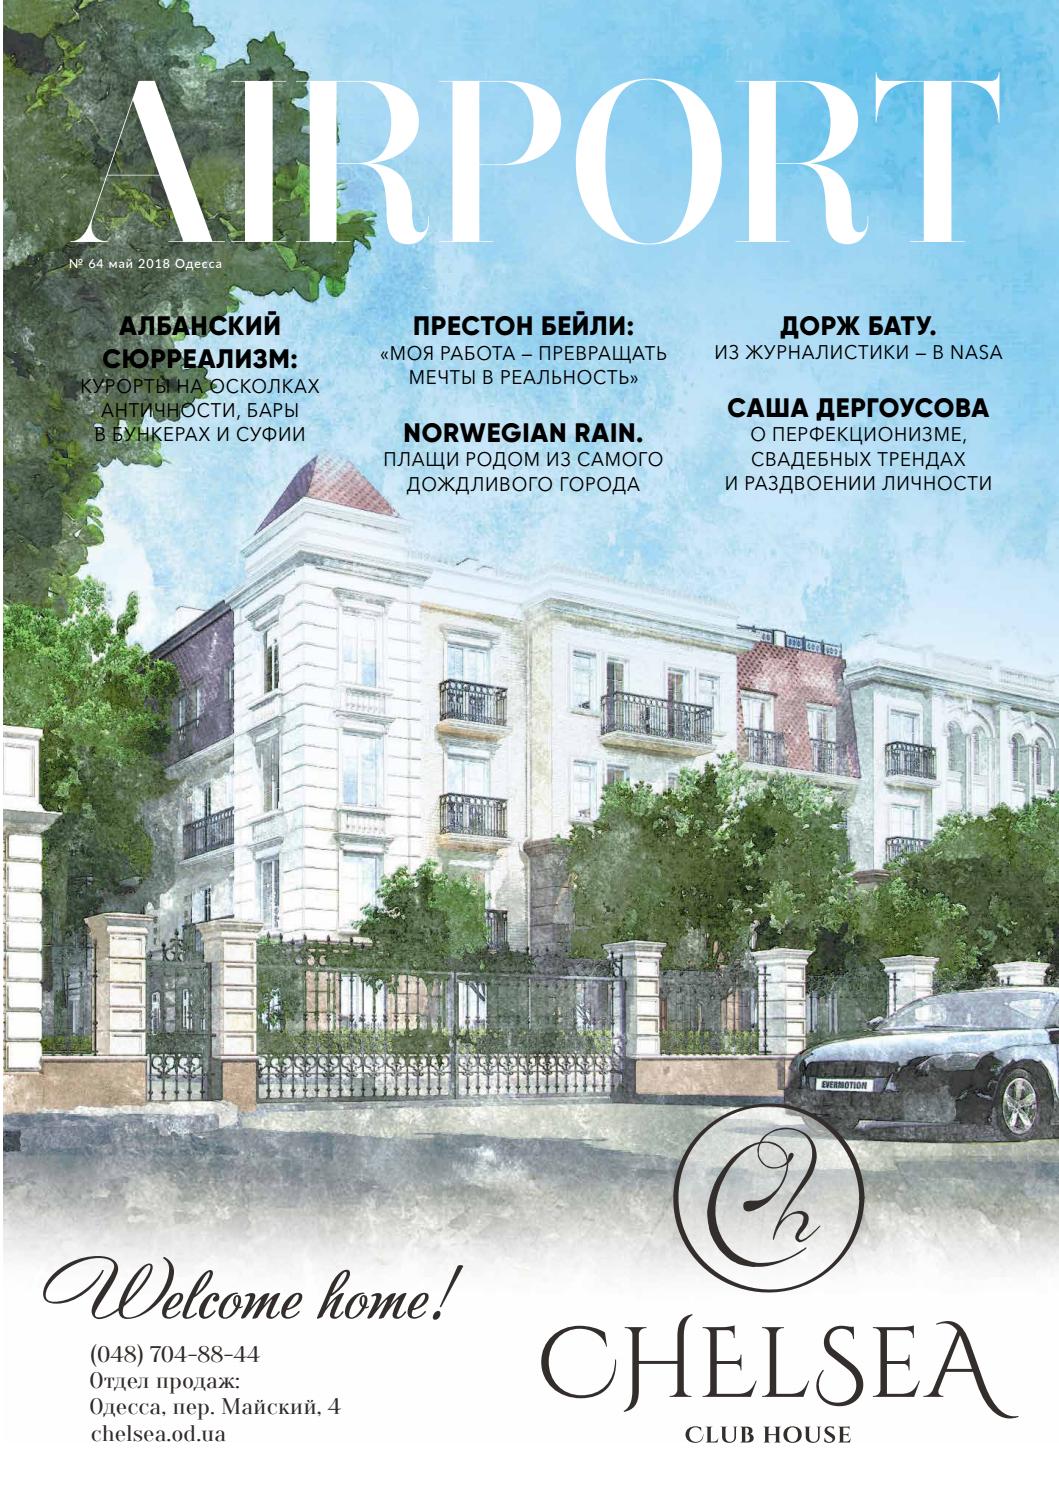 Salon De Jardin Luxe Charmant May 18 by Airport Magazine Odessa issuu